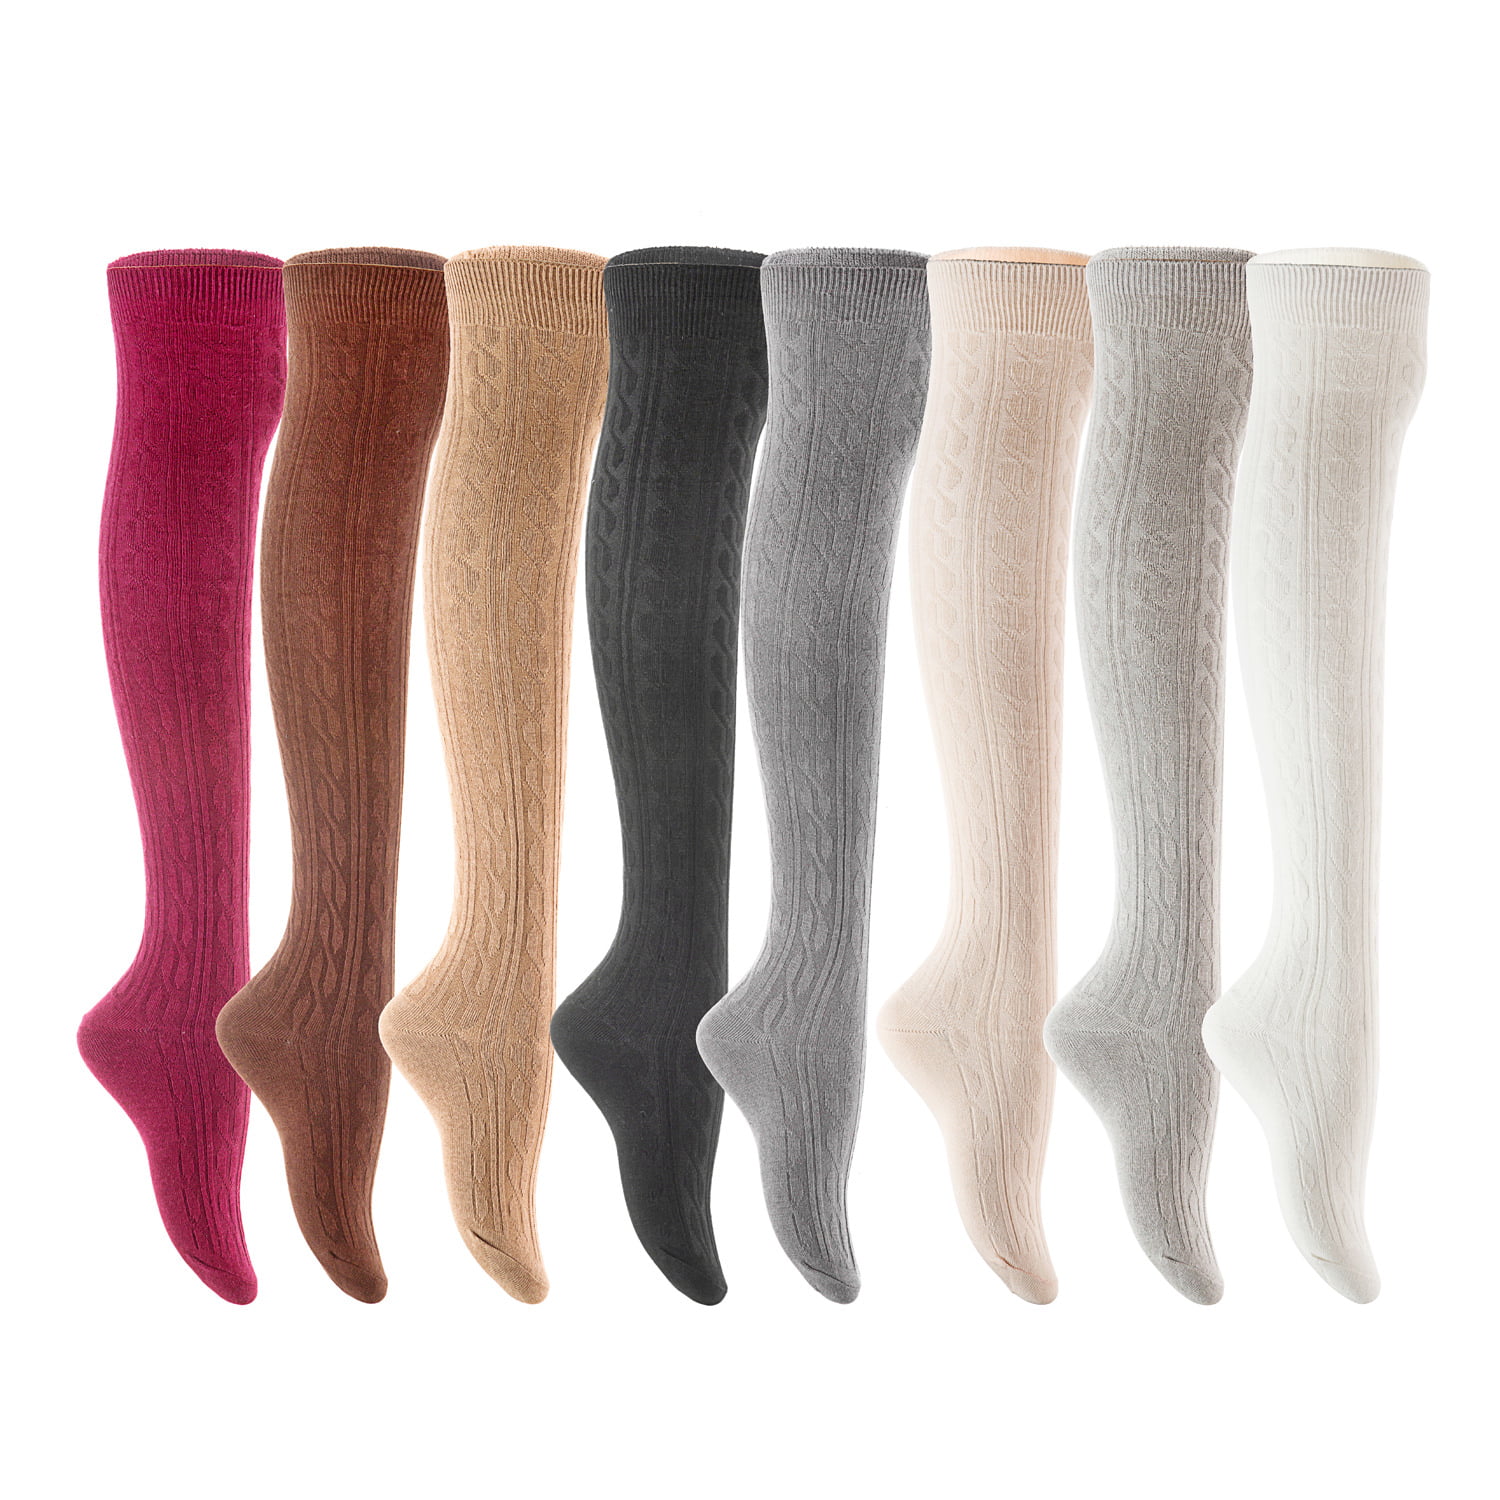 Aatmart 3 Pairs Awesome Women Thigh High Cotton Boot Socks Durable Knee High Socks Perfect